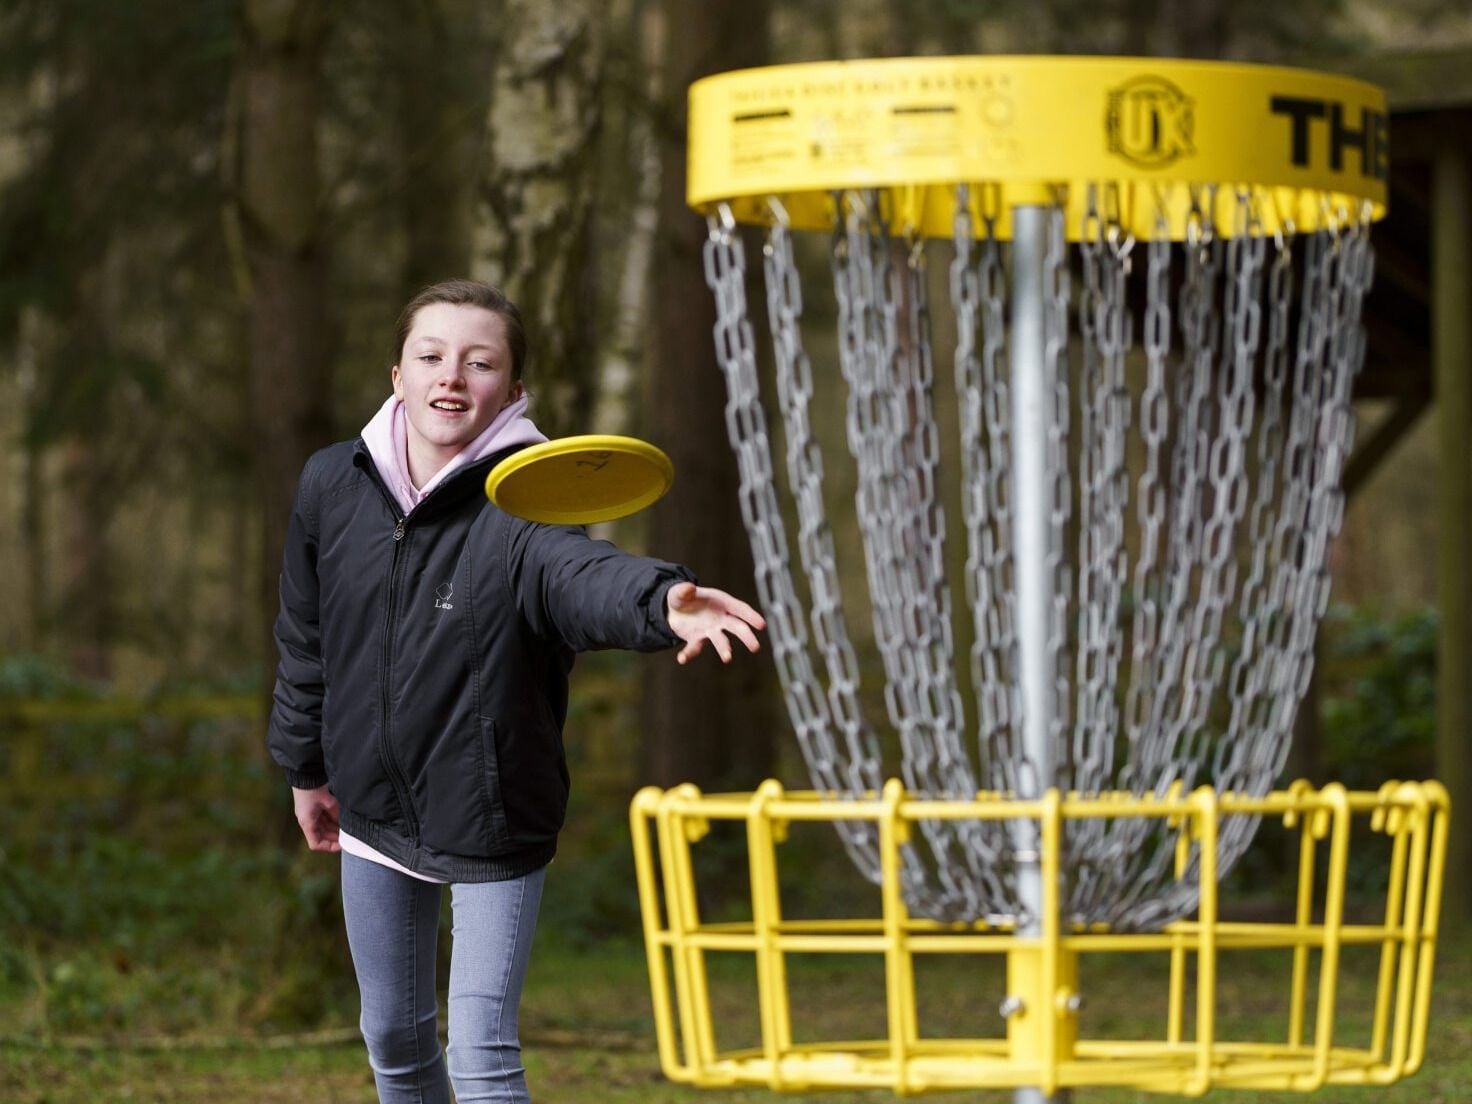 Discover the exciting would of disc golf at Cannock Chase Forest